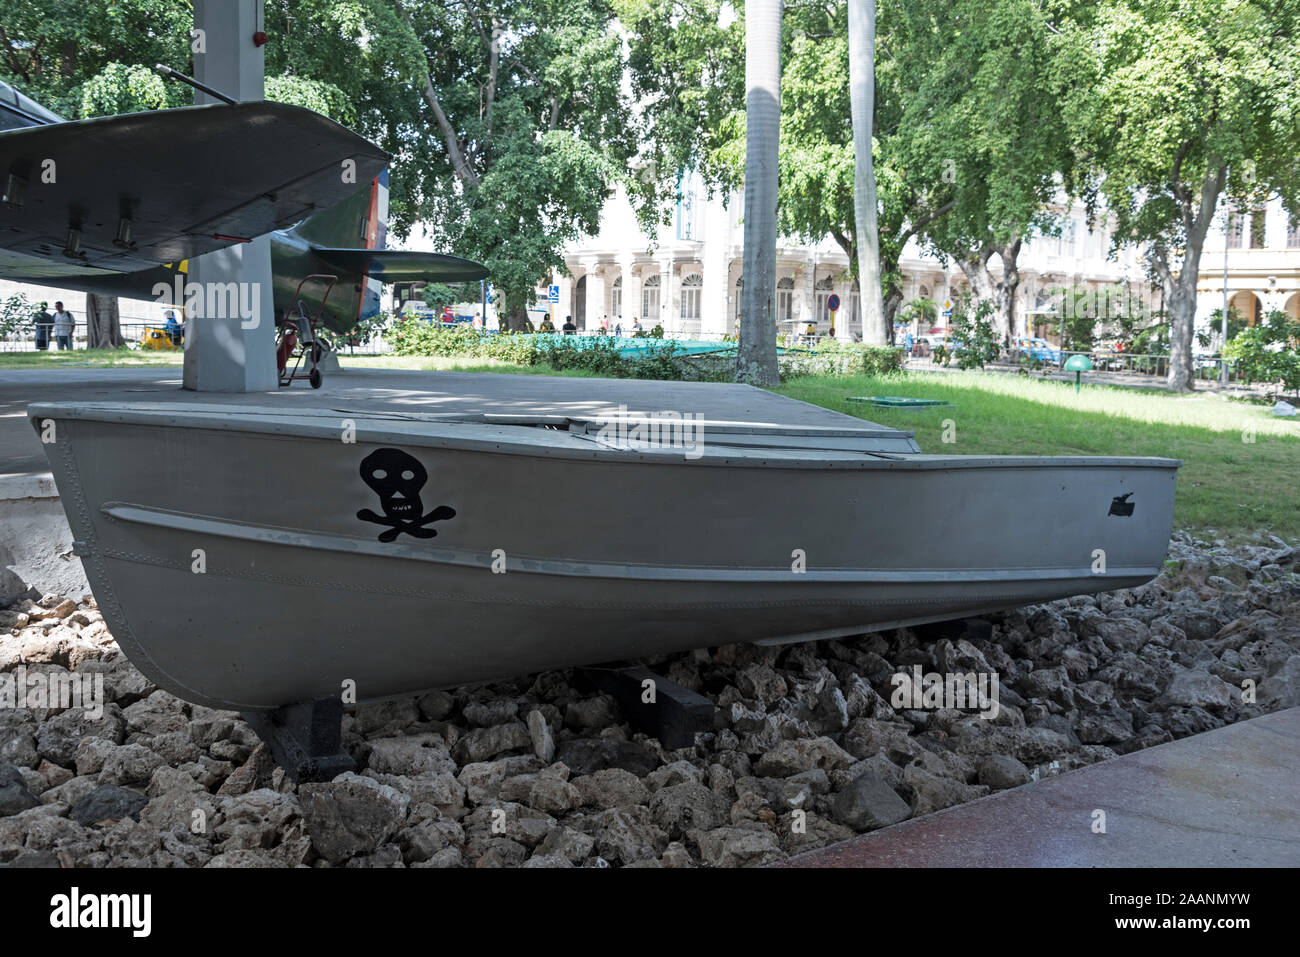 A small speedboat used for carrying CIA-trained mercenaries during the invasion of Cuba when they landed in the ‘Bay of Pigs’ in 1961   The boat is o Stock Photo